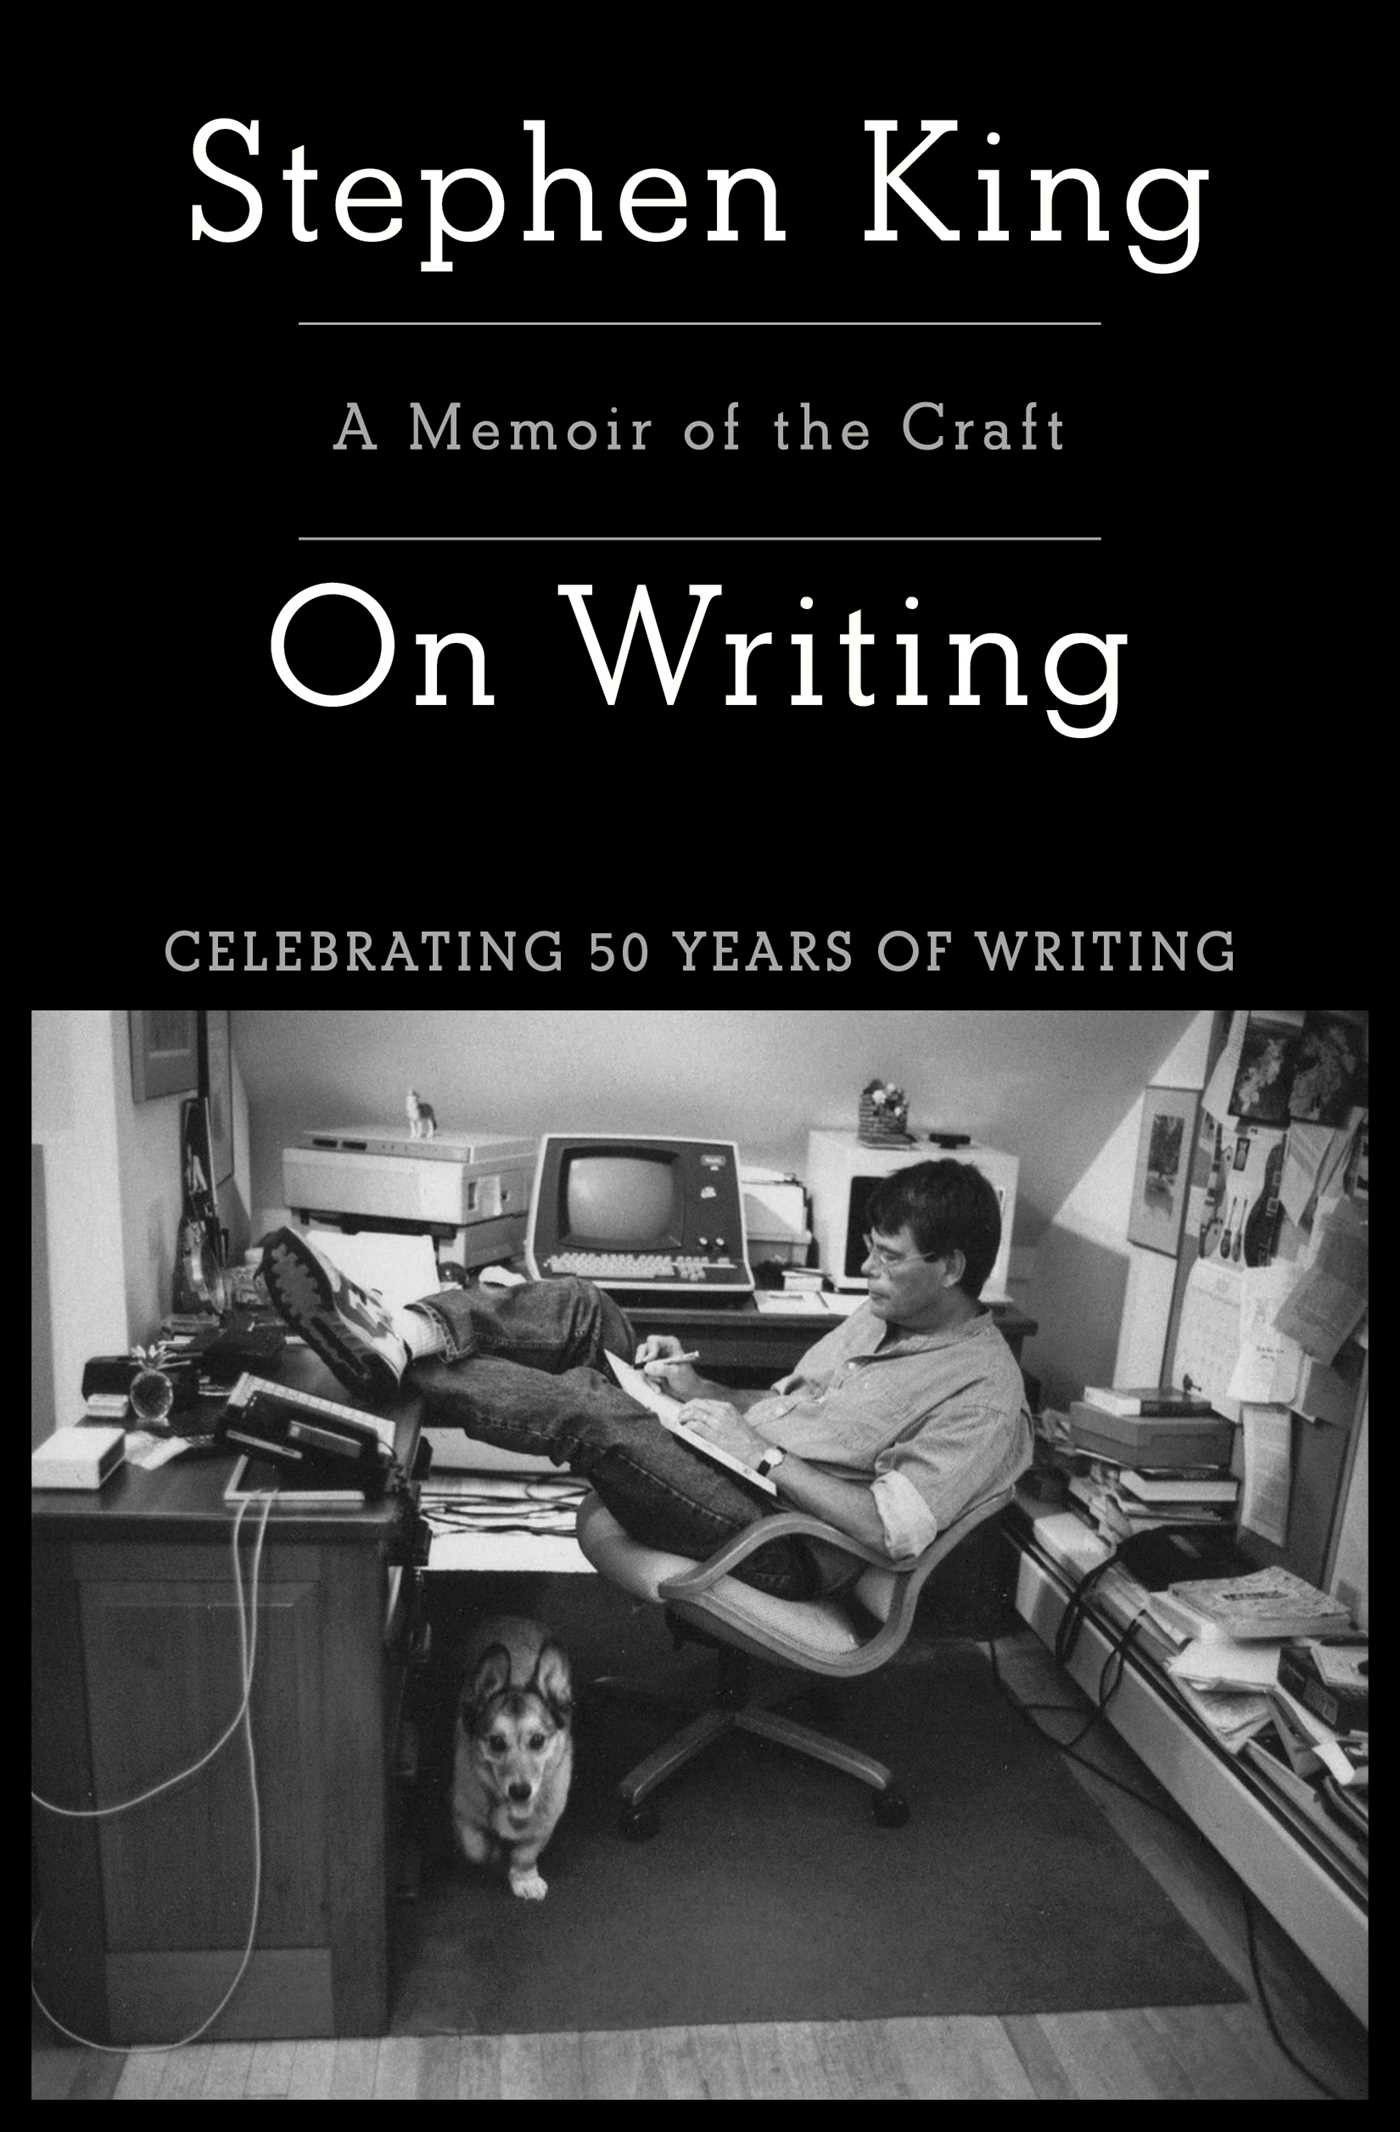 The front cover of "On Writing: A Memoir of the Craft", by Stephen King.